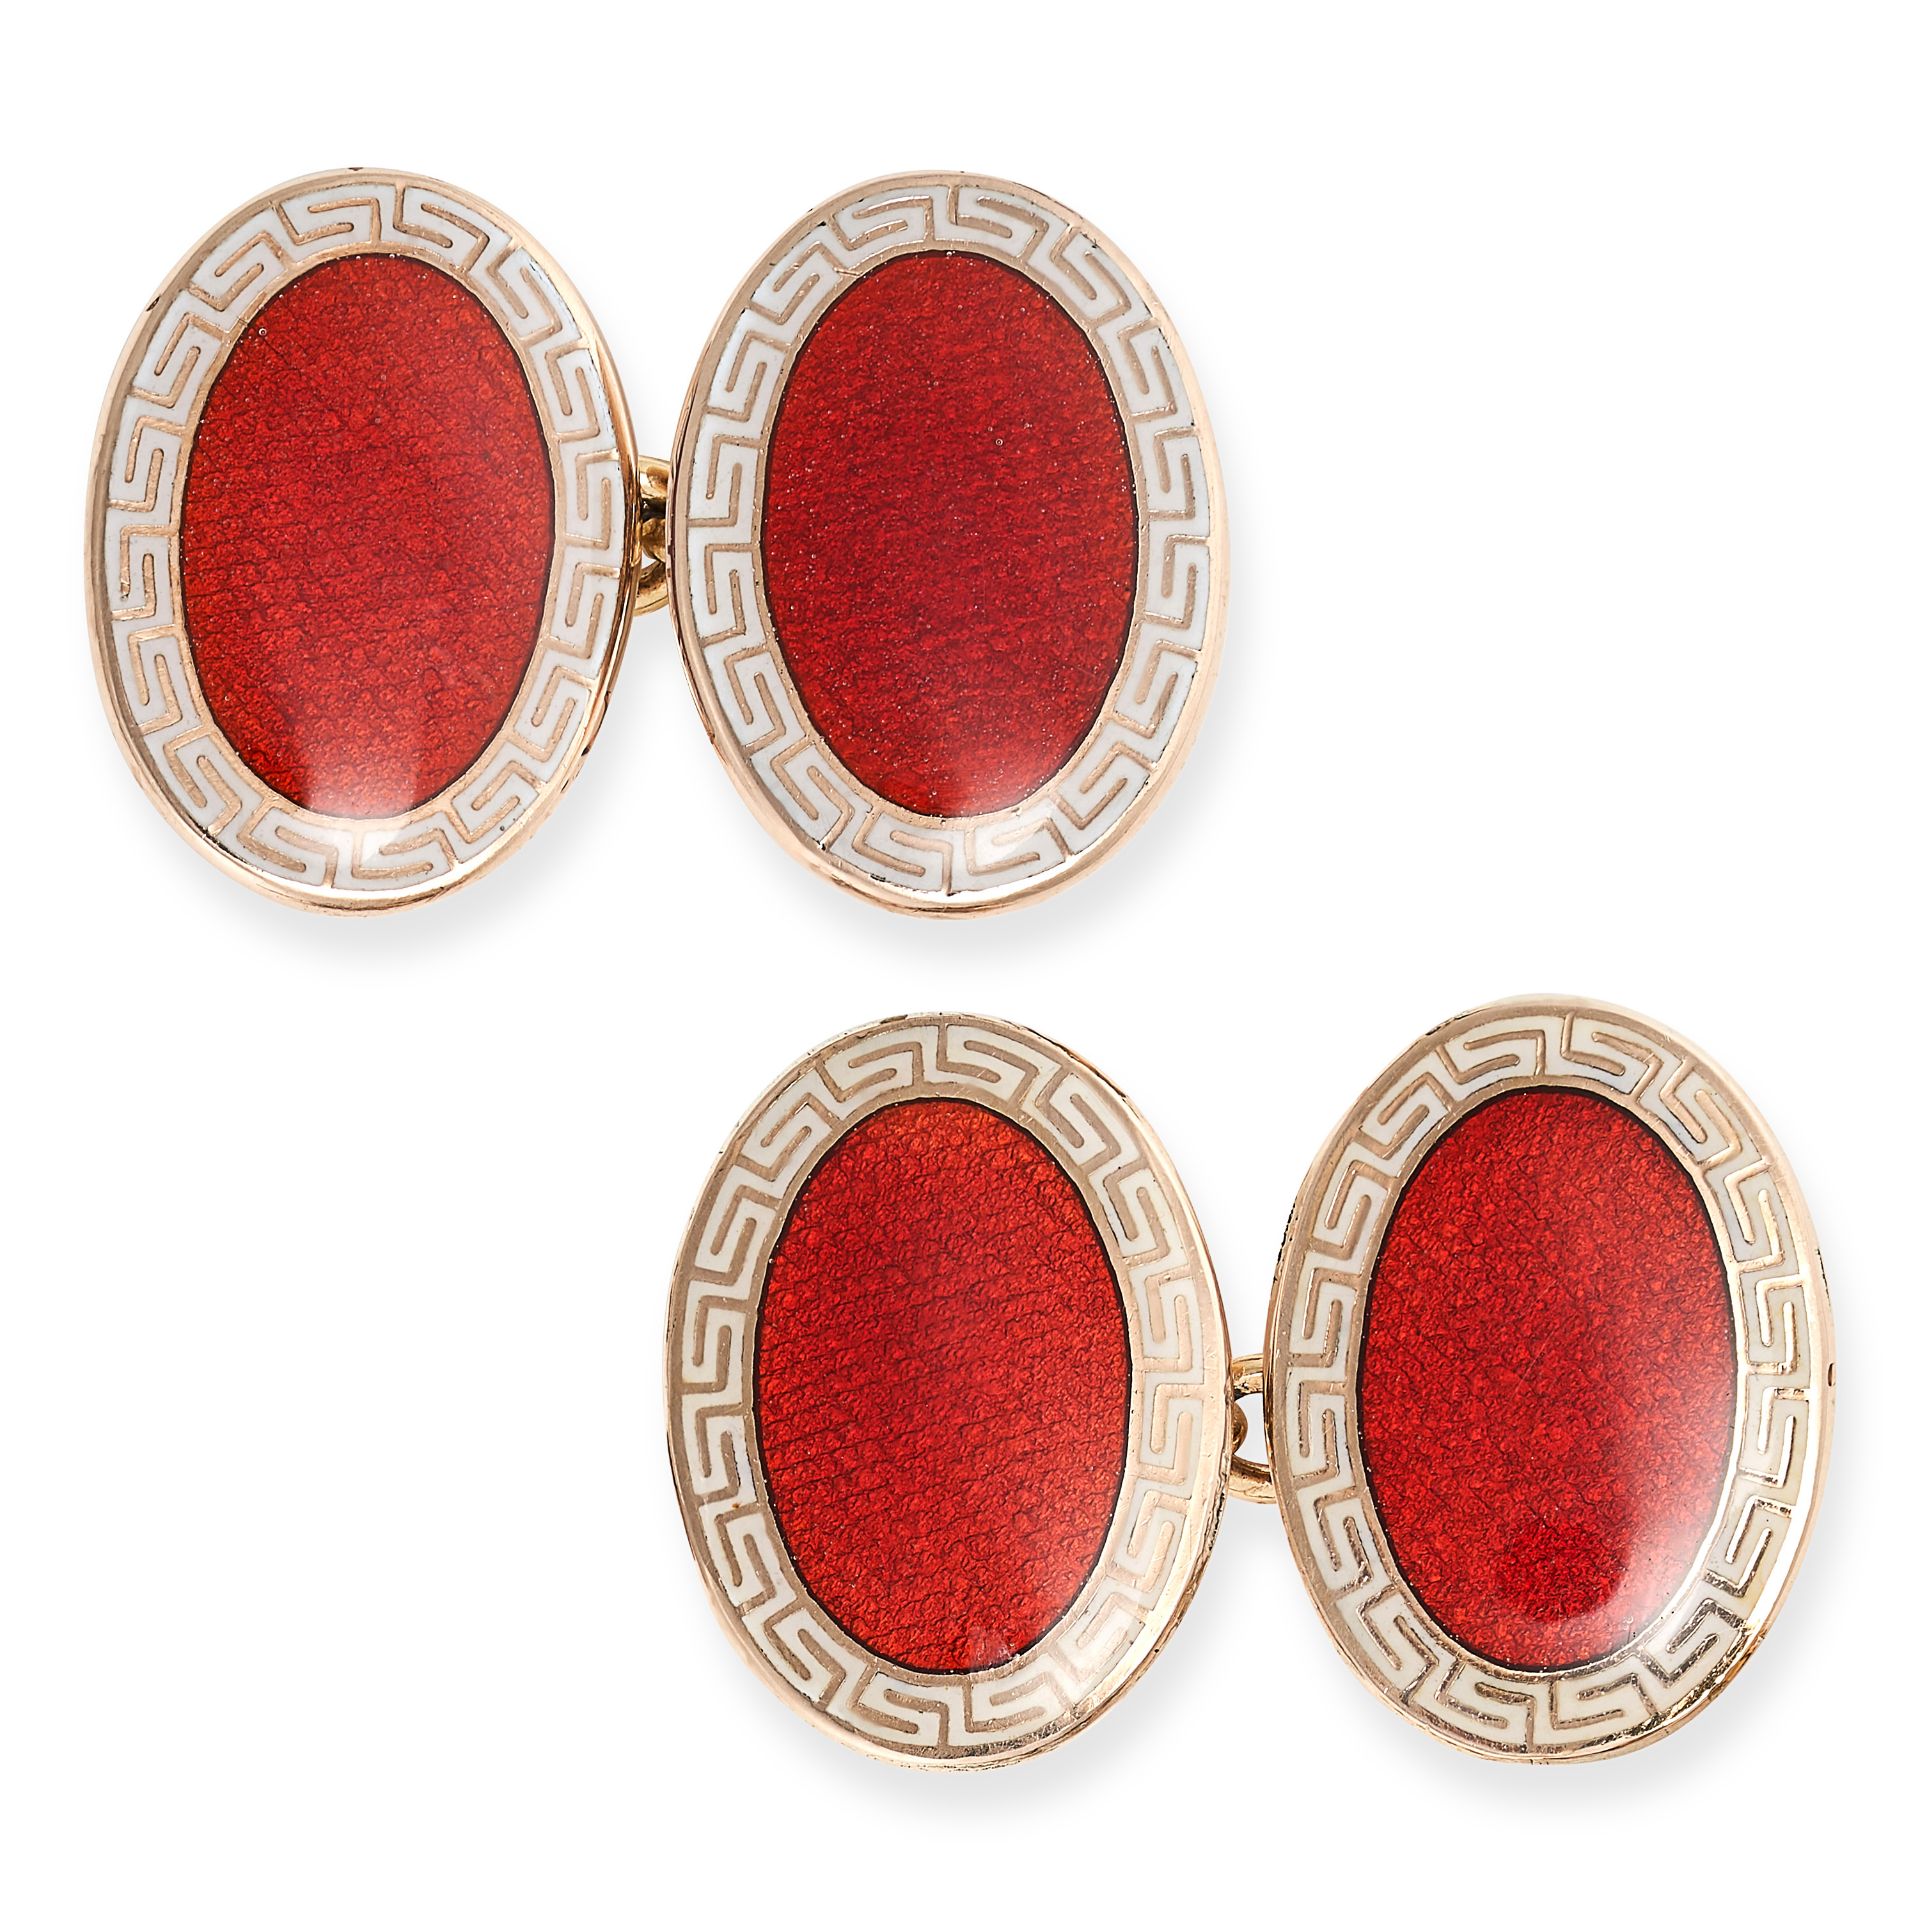 A PAIR OF ANTIQUE ENAMEL CUFFLINKS in 9ct yellow gold, the oval face set with orange guilloche en...